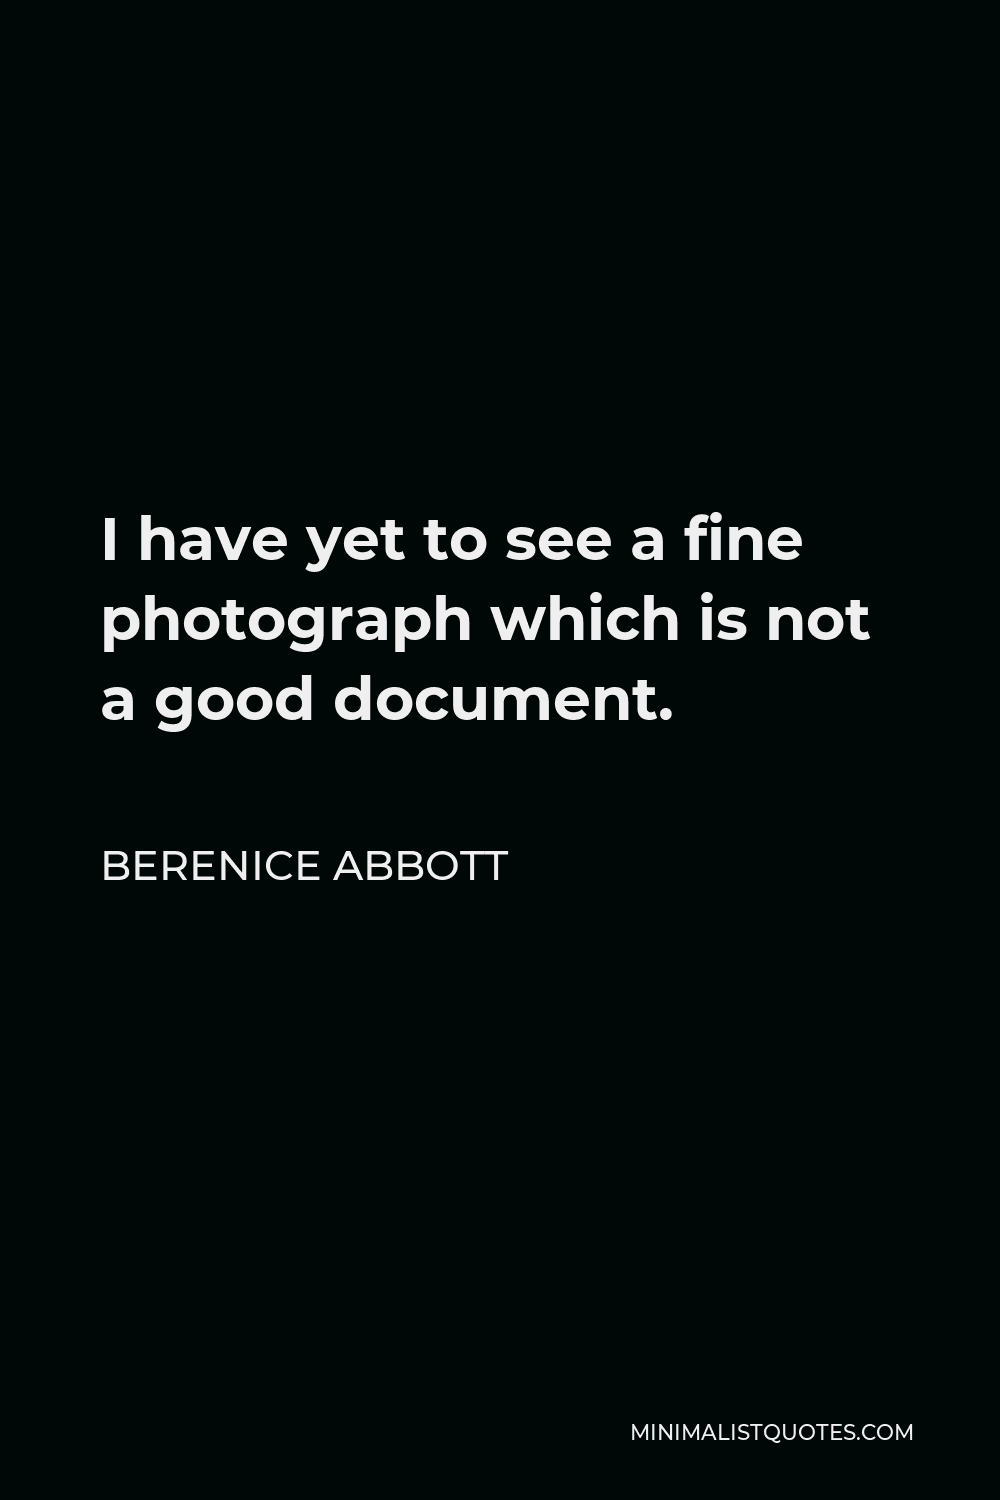 Berenice Abbott Quote - I have yet to see a fine photograph which is not a good document.